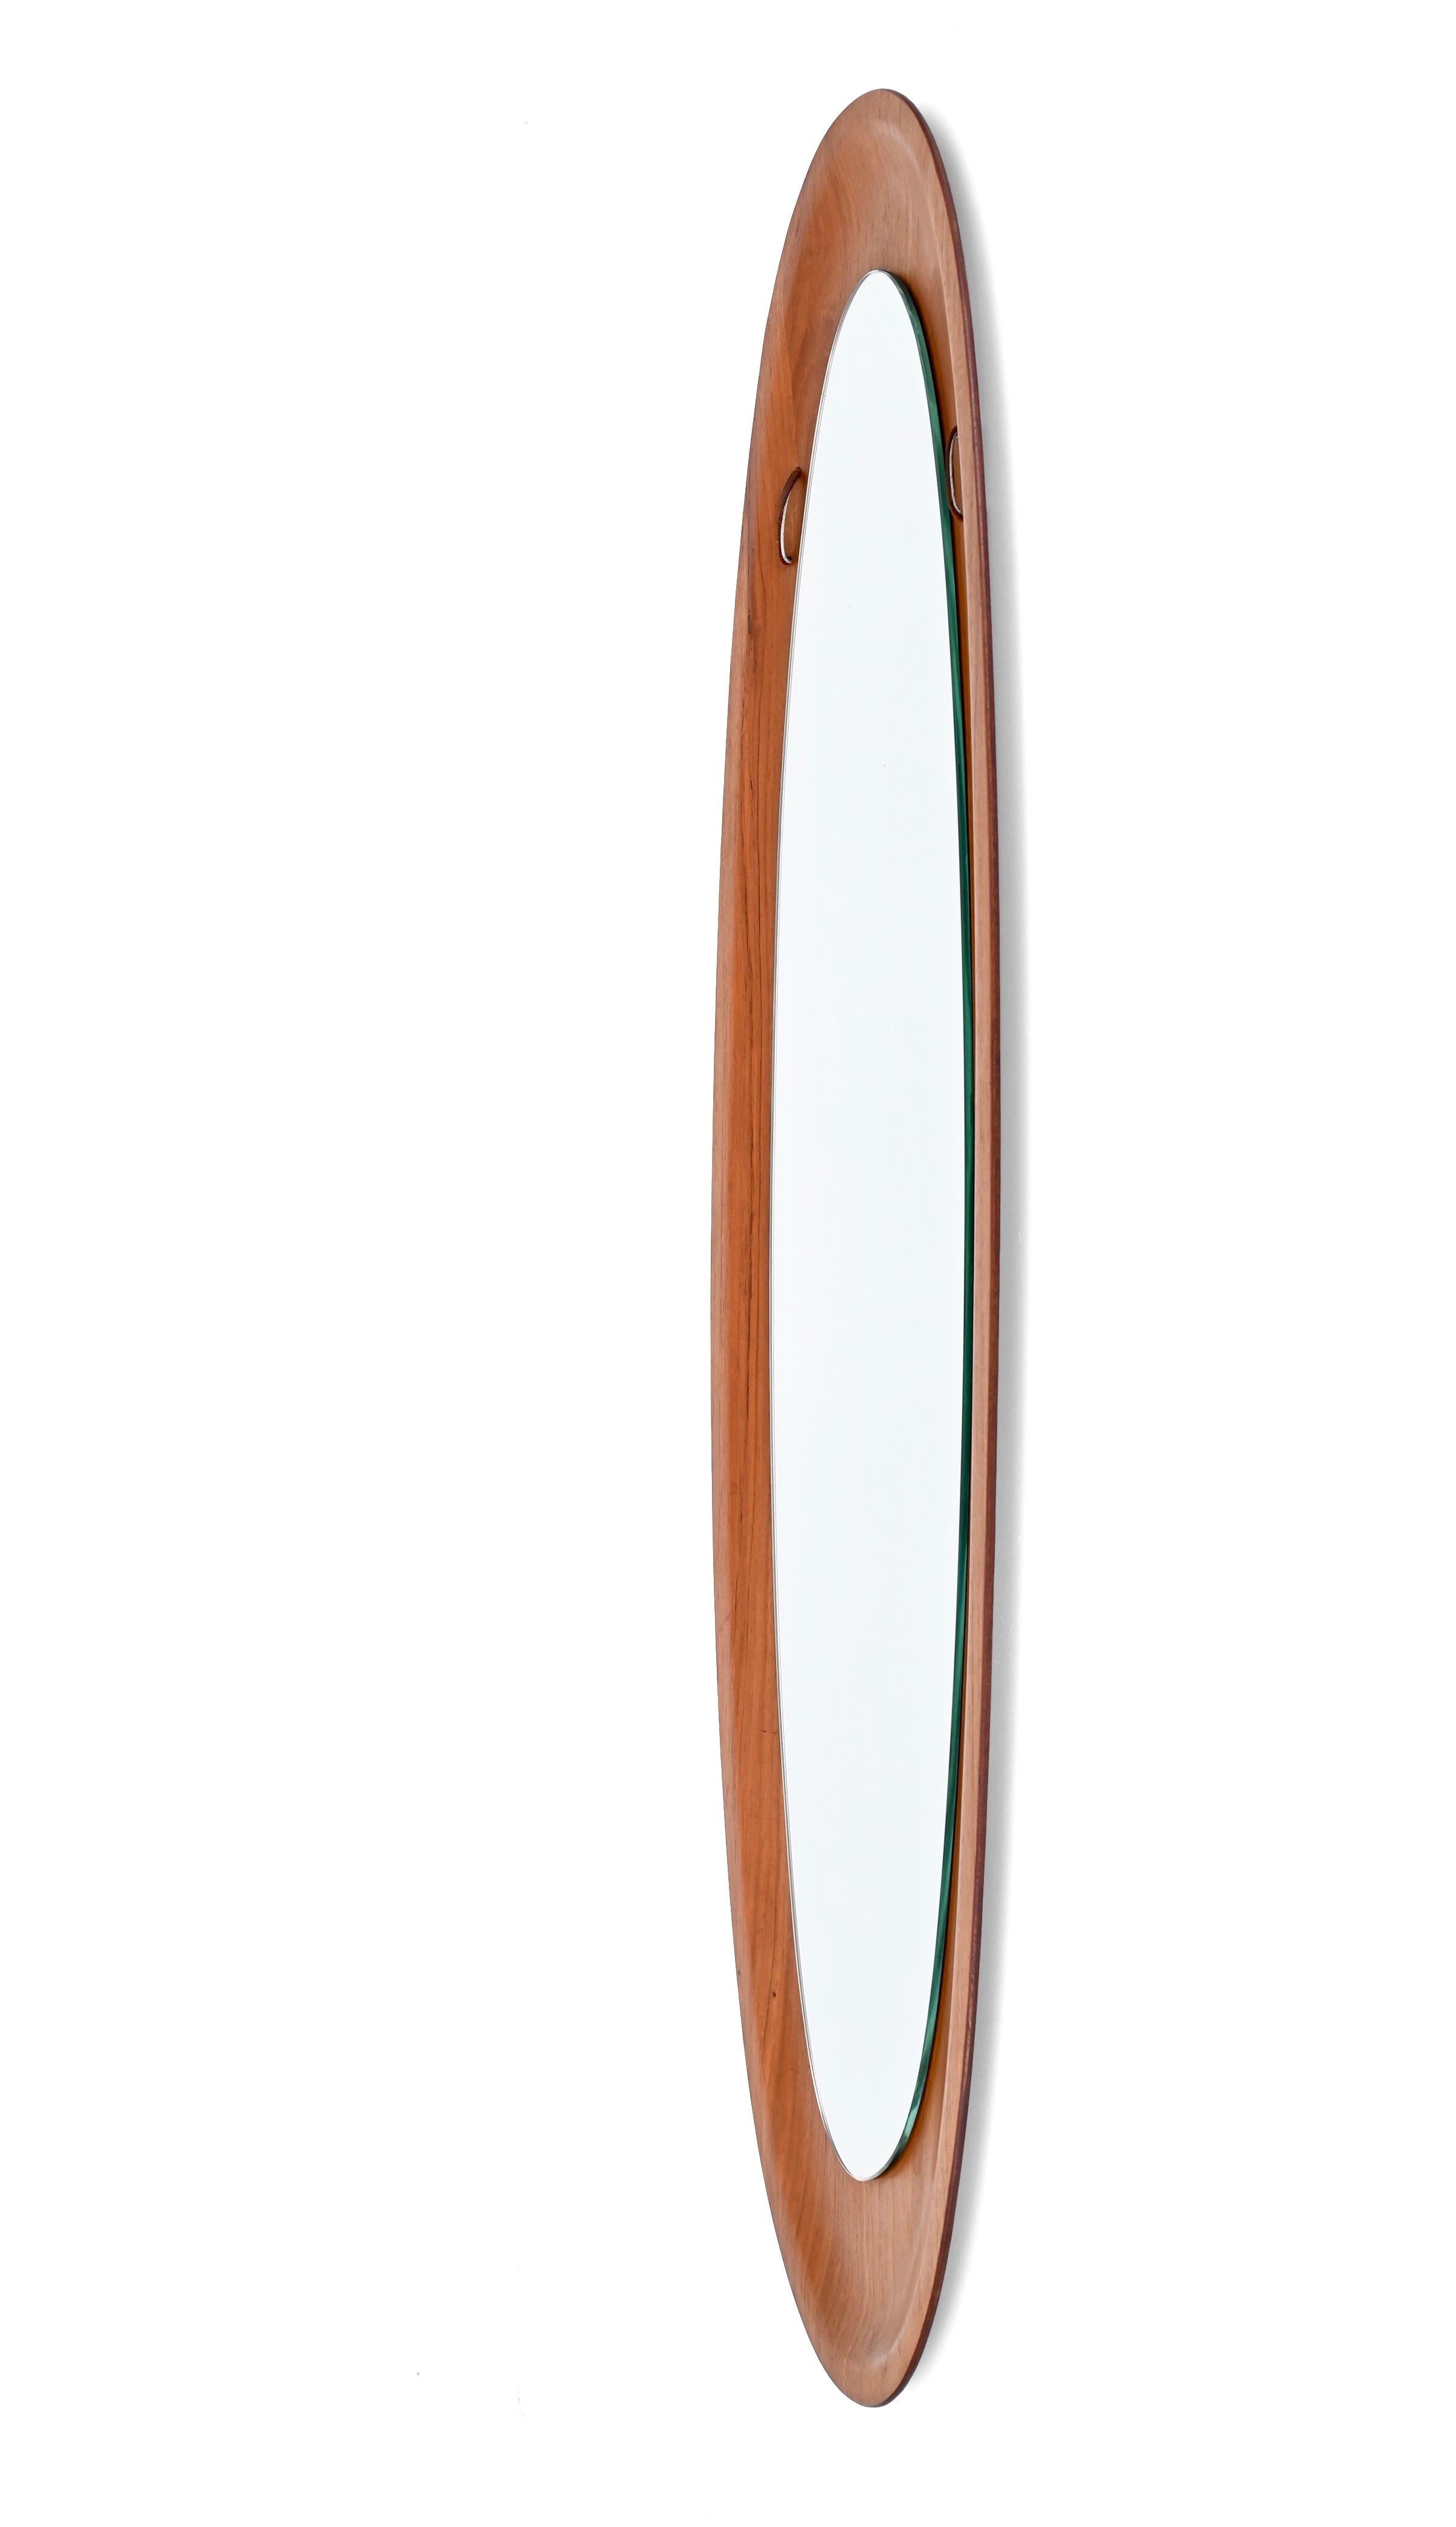 Mid-Century Campo & Graffi Curved Teak Wood Oval Wall Mirror, Italy, 1960s For Sale 6